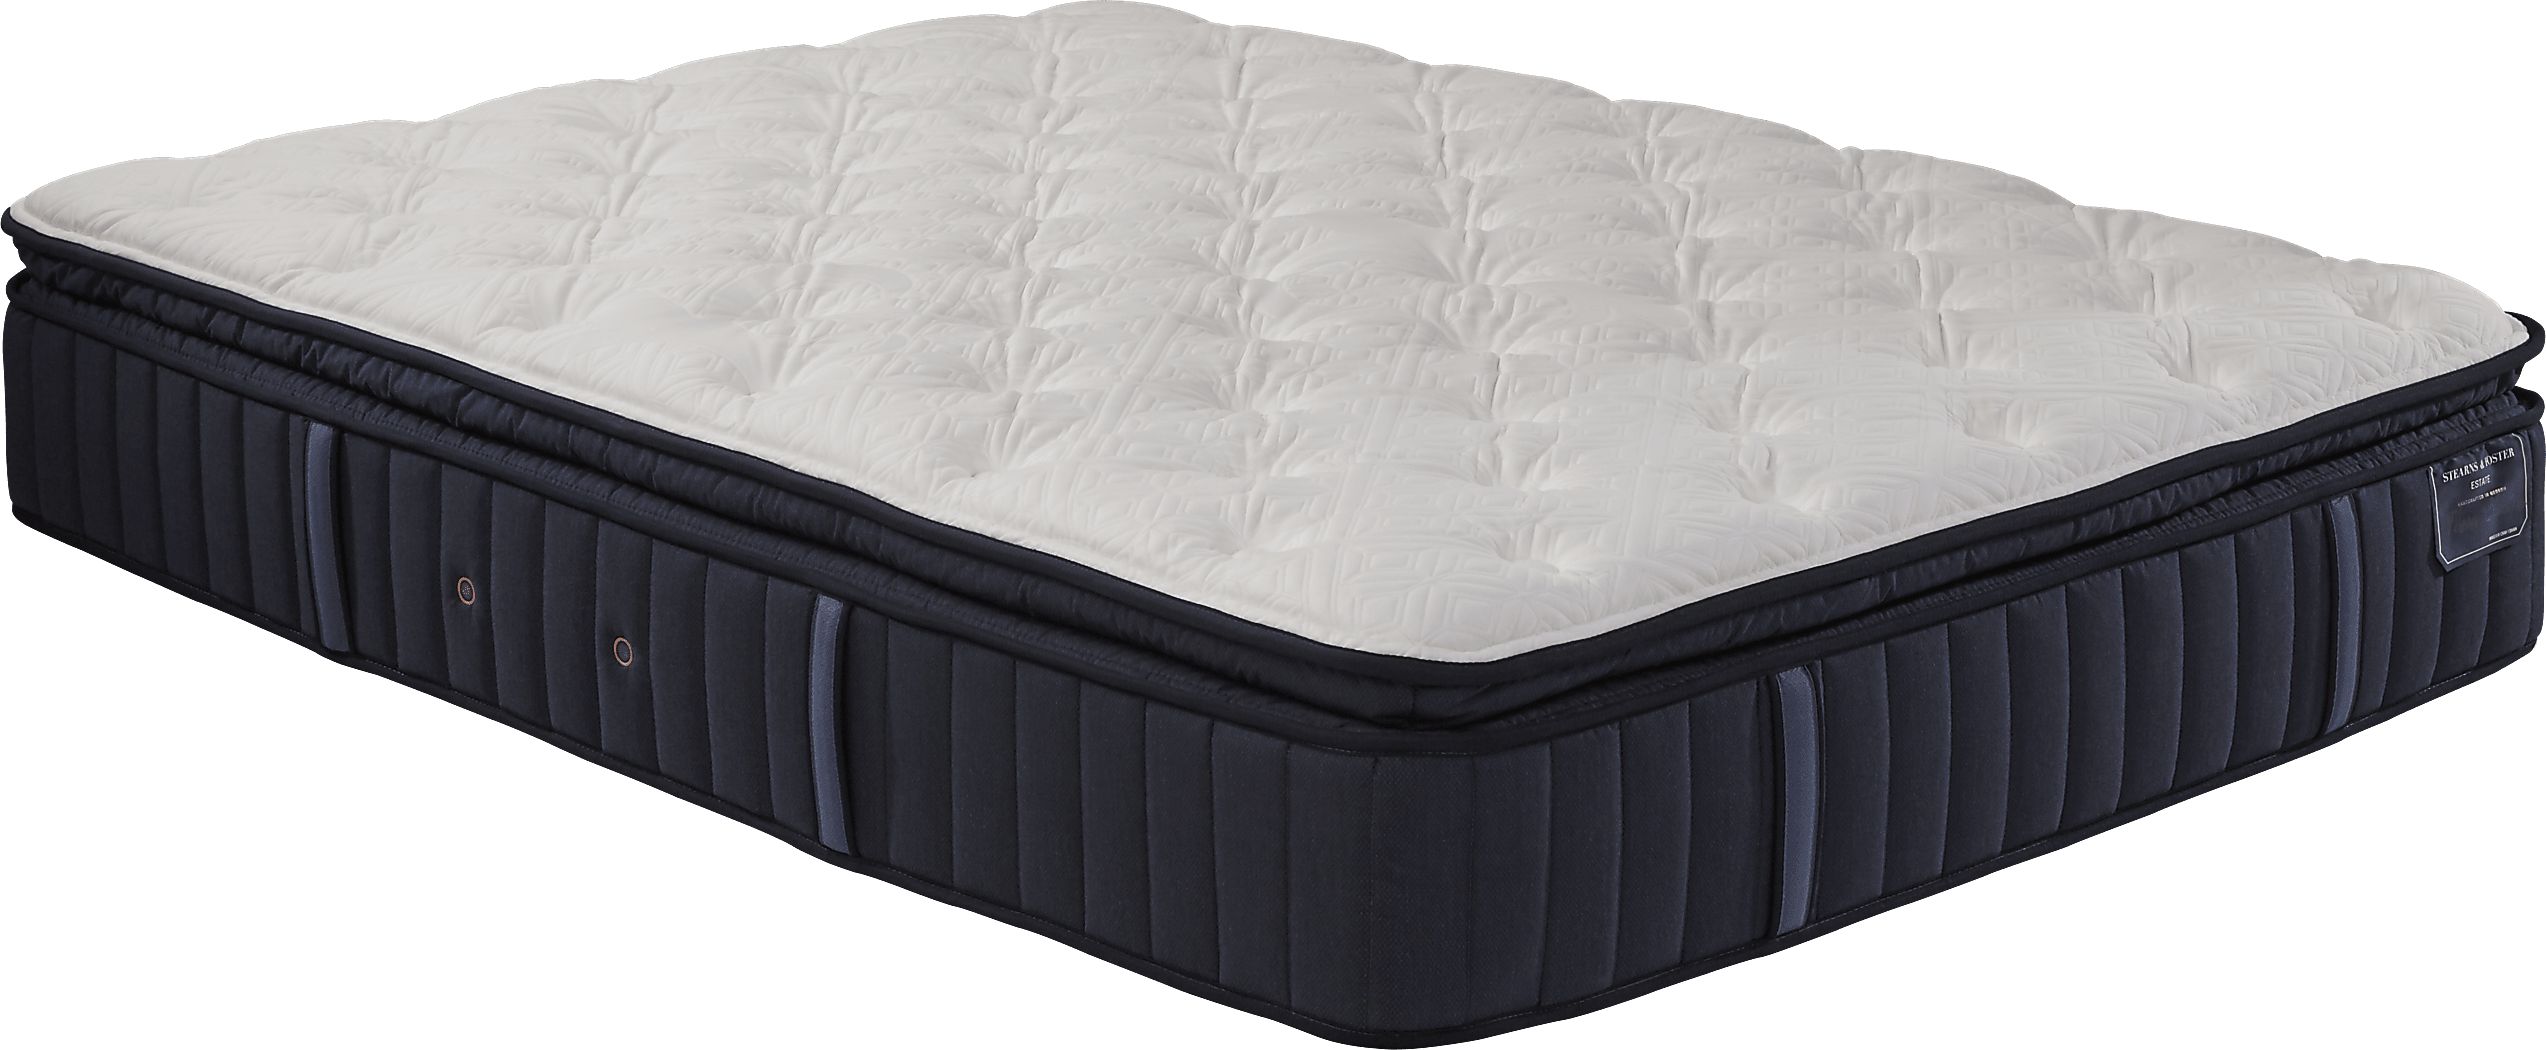 stearns and foster hurston plush king mattress reviews